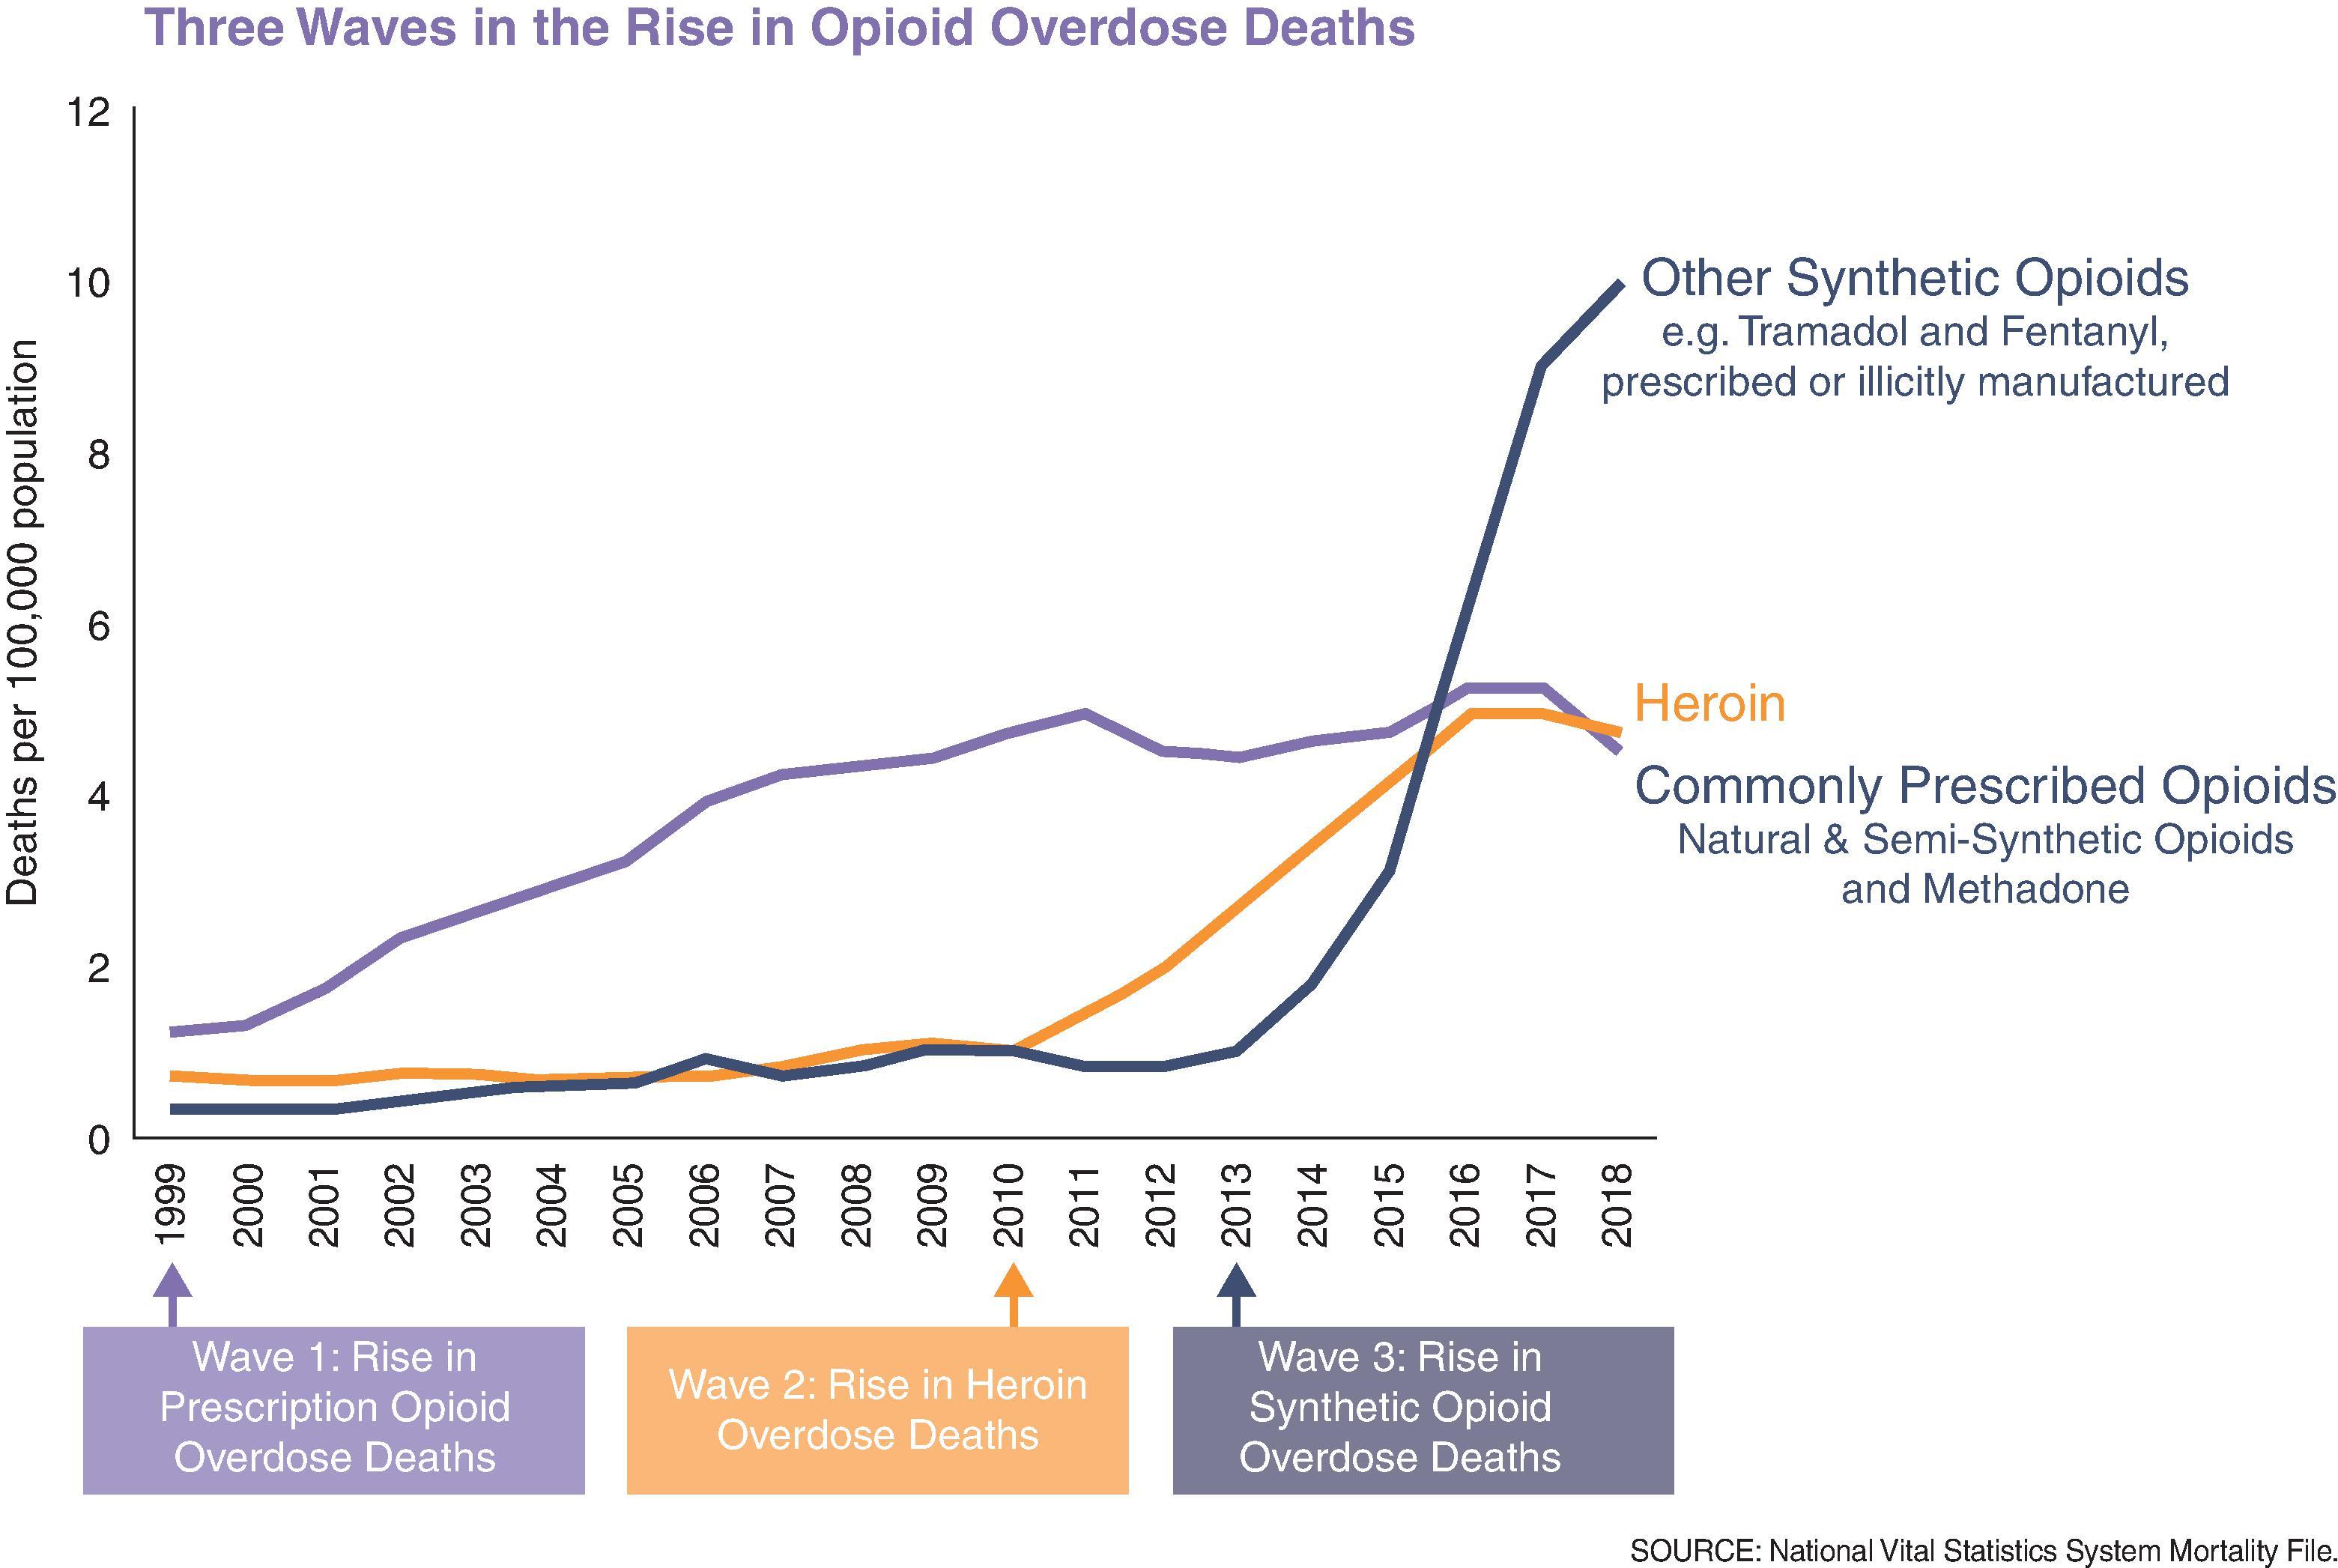 Figure 27.1, The three waves of the rise of opioid overdose deaths with Wave 1 because of a rise in prescription opioids, Wave 2 because of illicit drugs such as heroin, and Wave 3 because of synthetic opioid usage, such as fentanyl. Image available at: https://www.cdc.gov/drugoverdose/epidemic/index.html